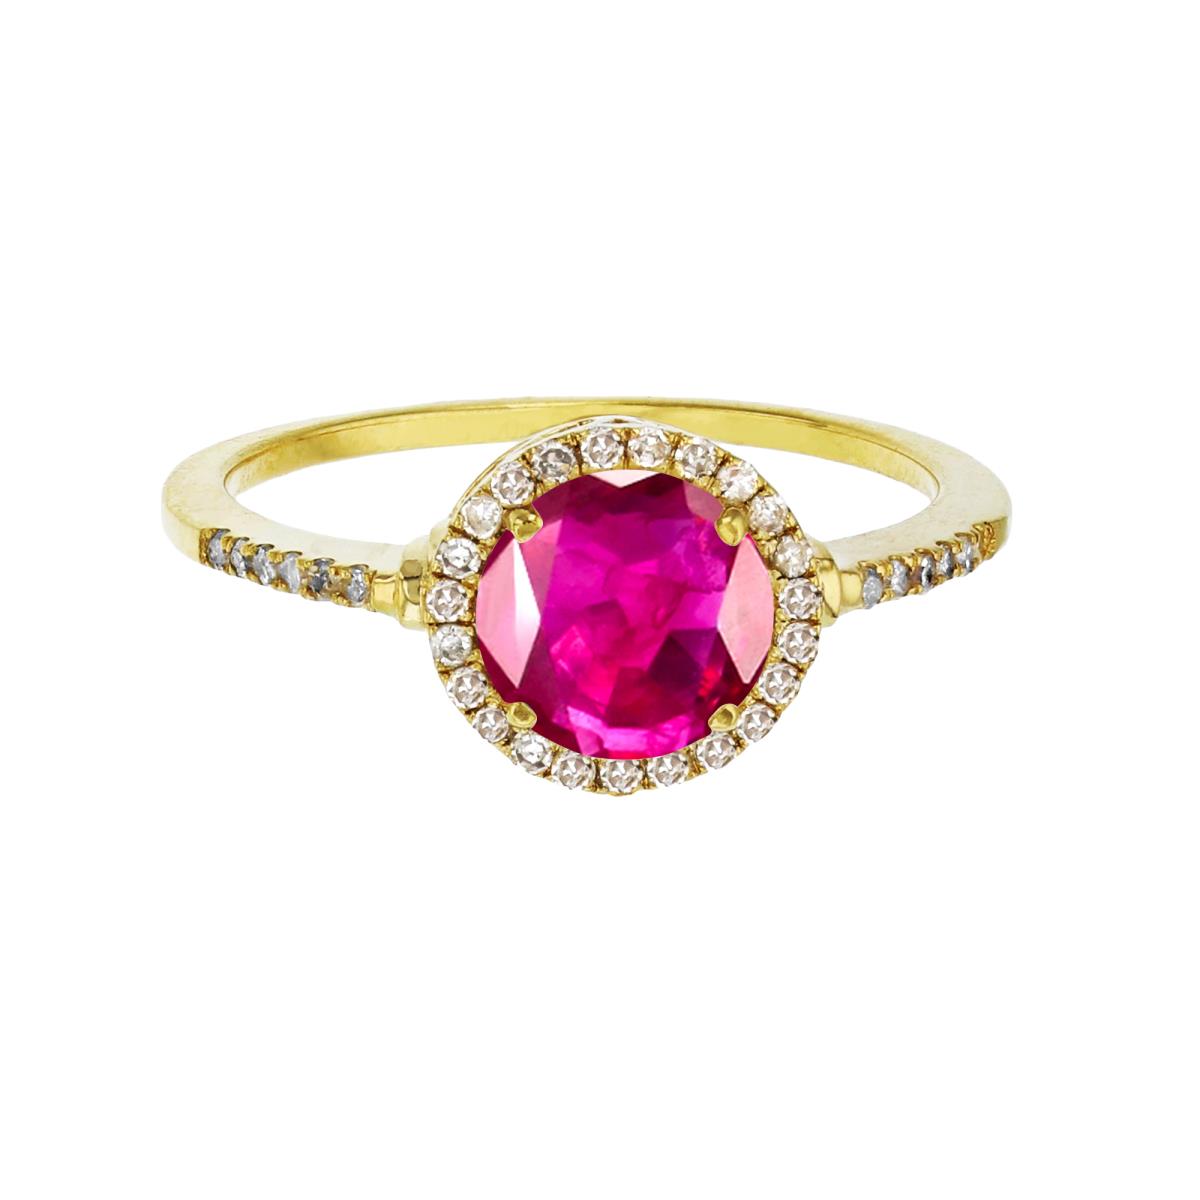 10K Yellow Gold 7mm Round Glass Filled Ruby & 0.18 CTTW Diamond Halo Ring